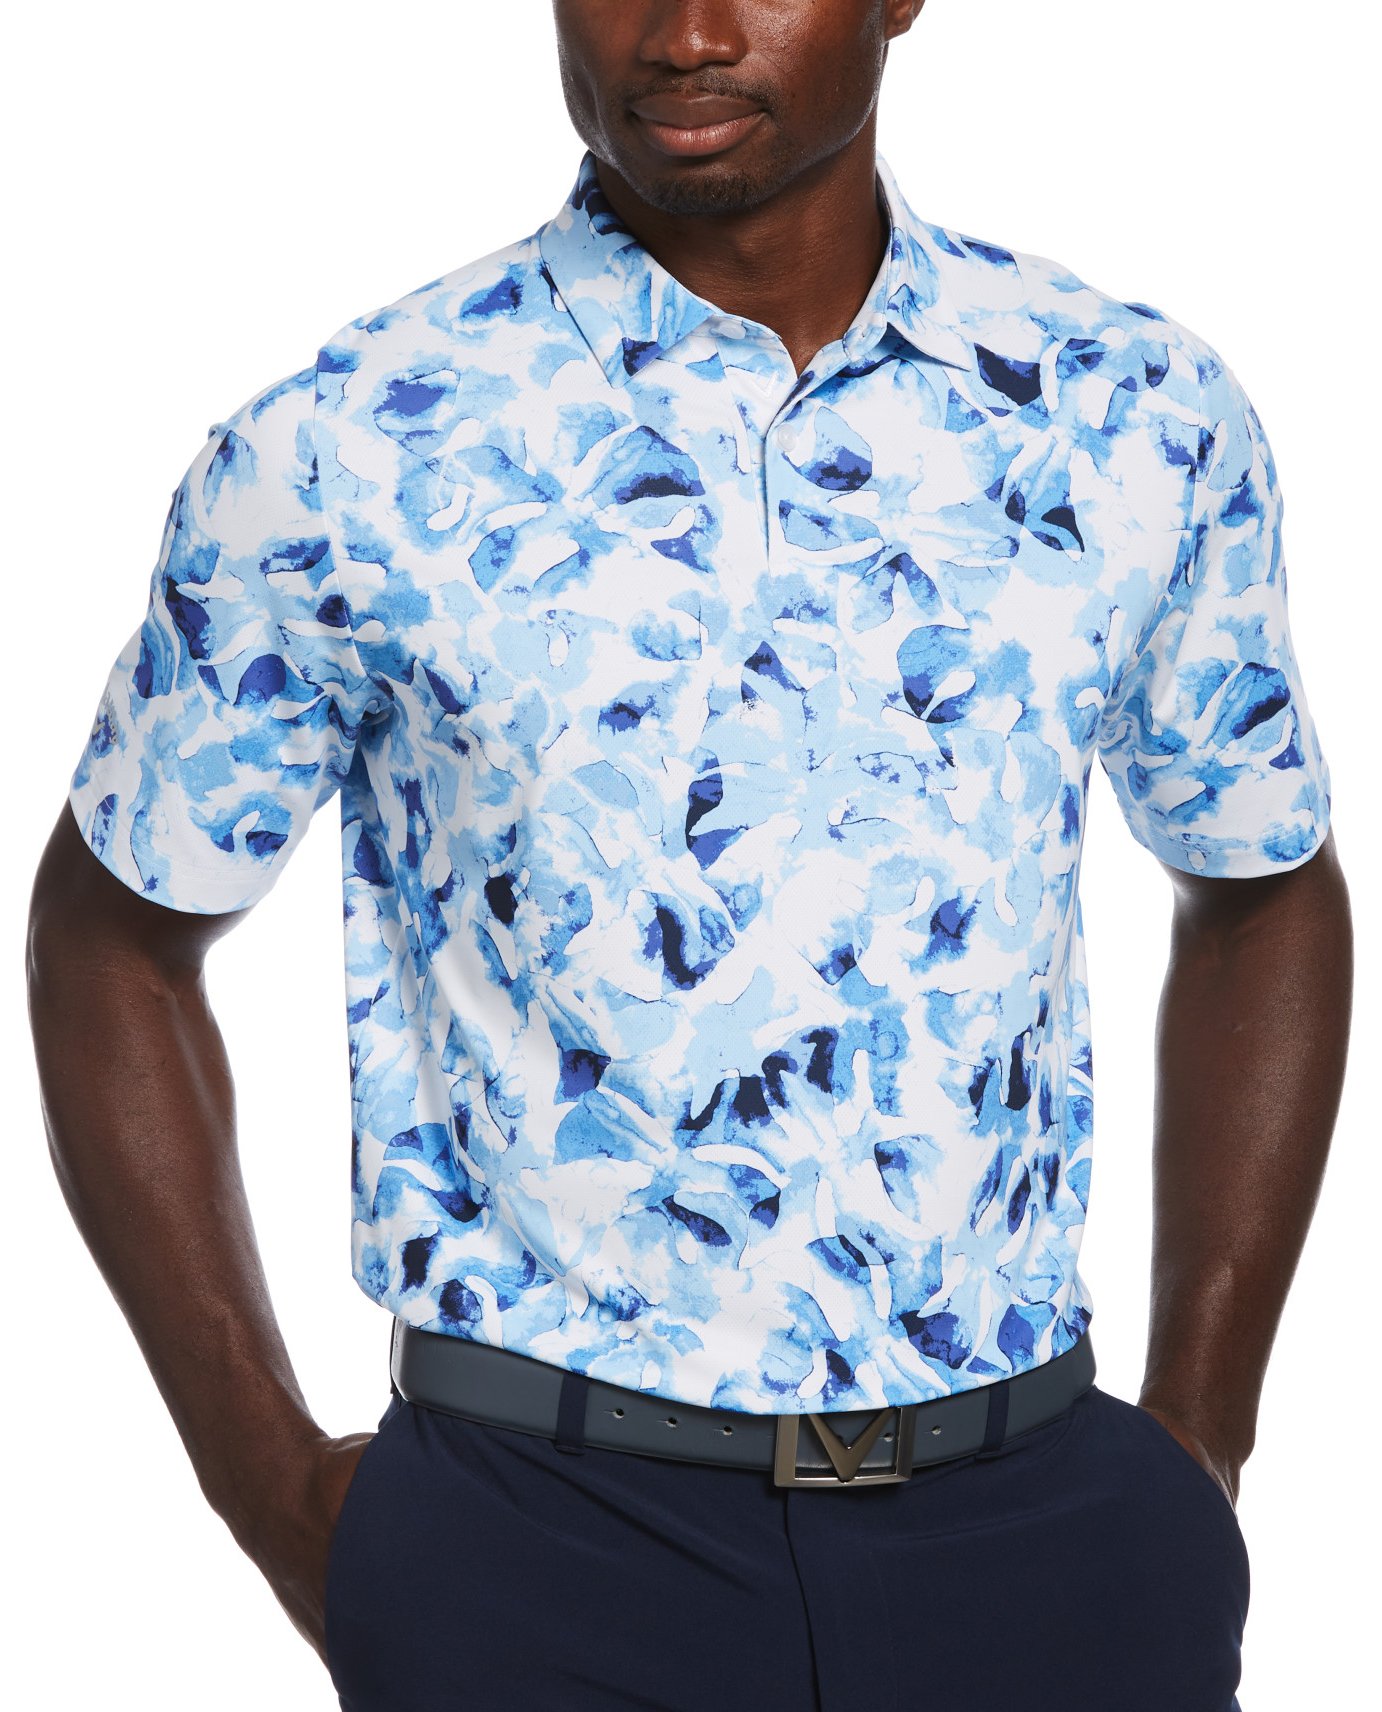 Save 43% on Callaway Men's Tie Dye Leaf Print Golf Polo, Polyester/elastane In Bright White, Size S